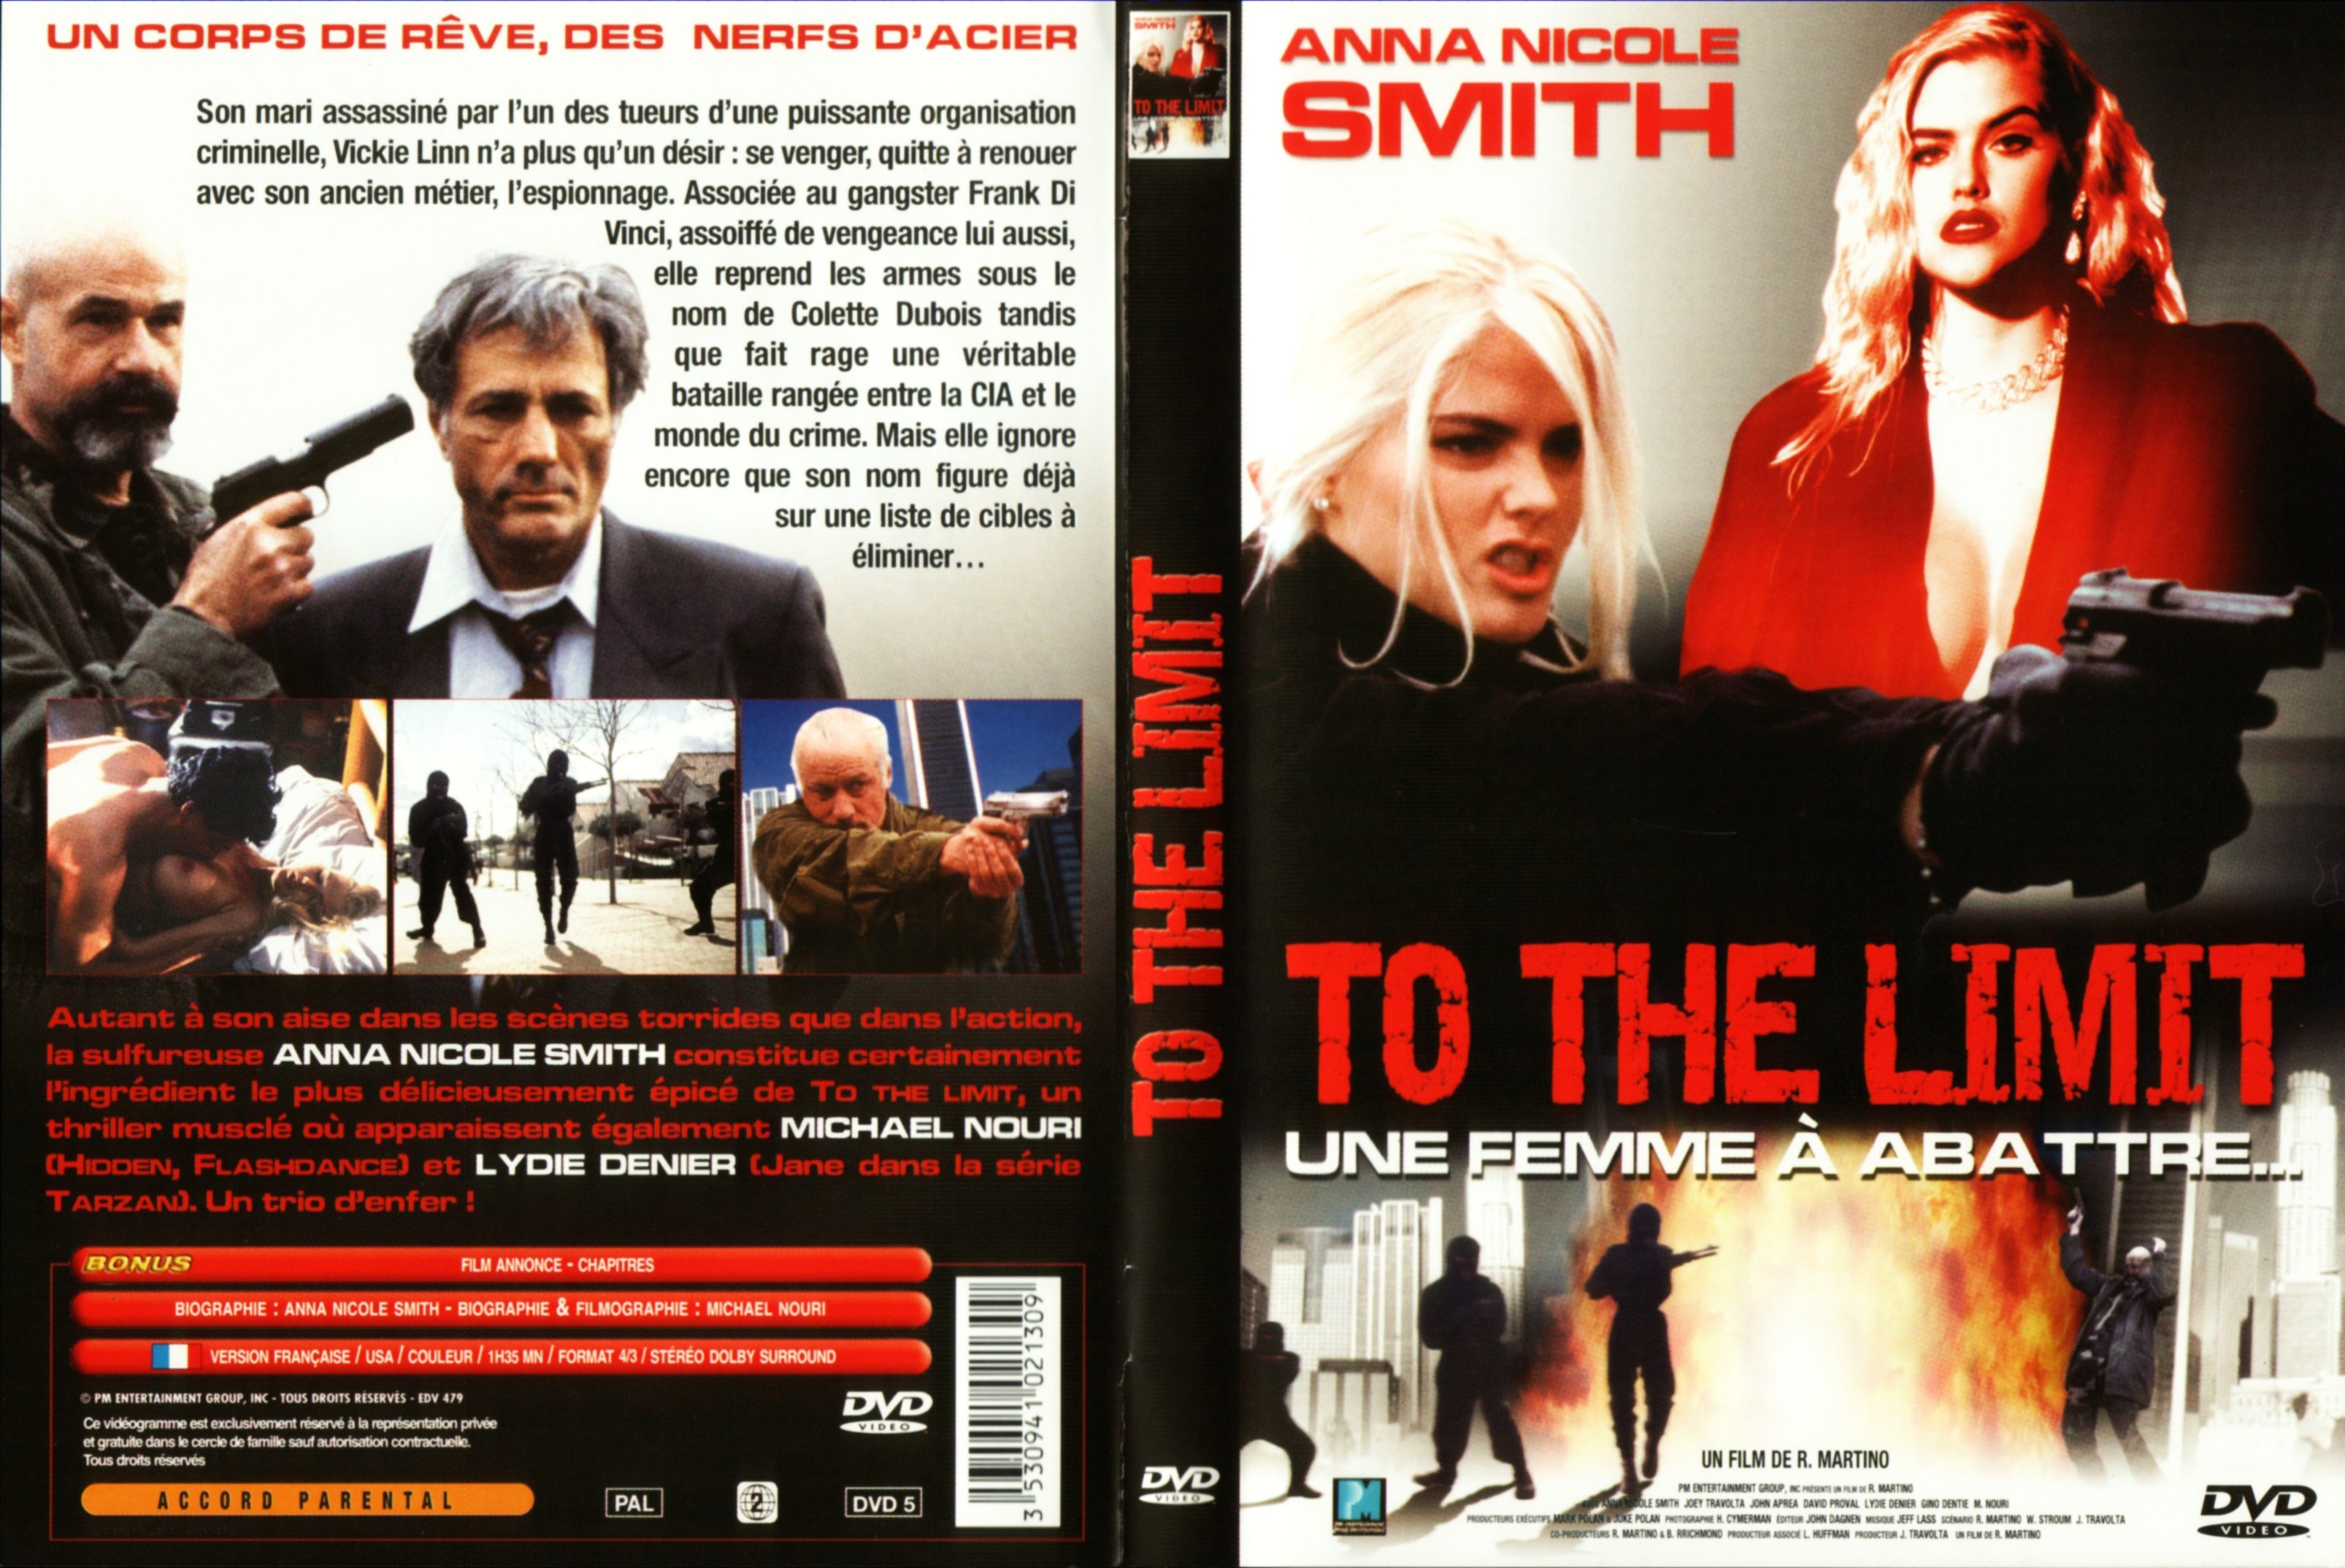 Jaquette DVD To the limit v2